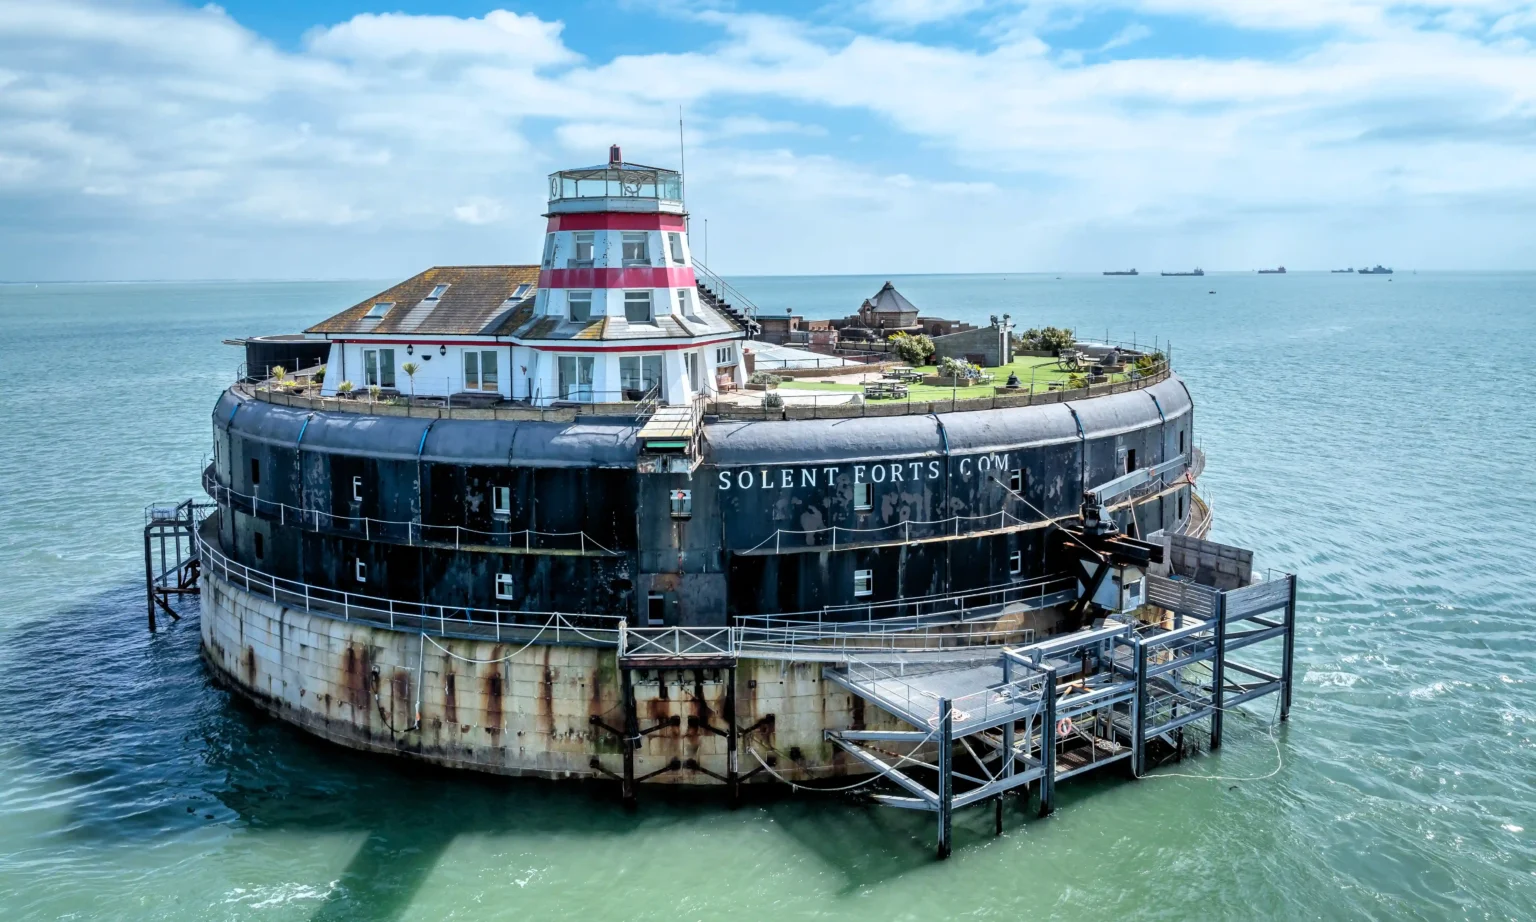 Two iconic sea forts, No Man’s Fort and Spitbank Fort, near Portsmouth, are up for auction at £1 million each, offering unique historical retreats with luxury amenities.